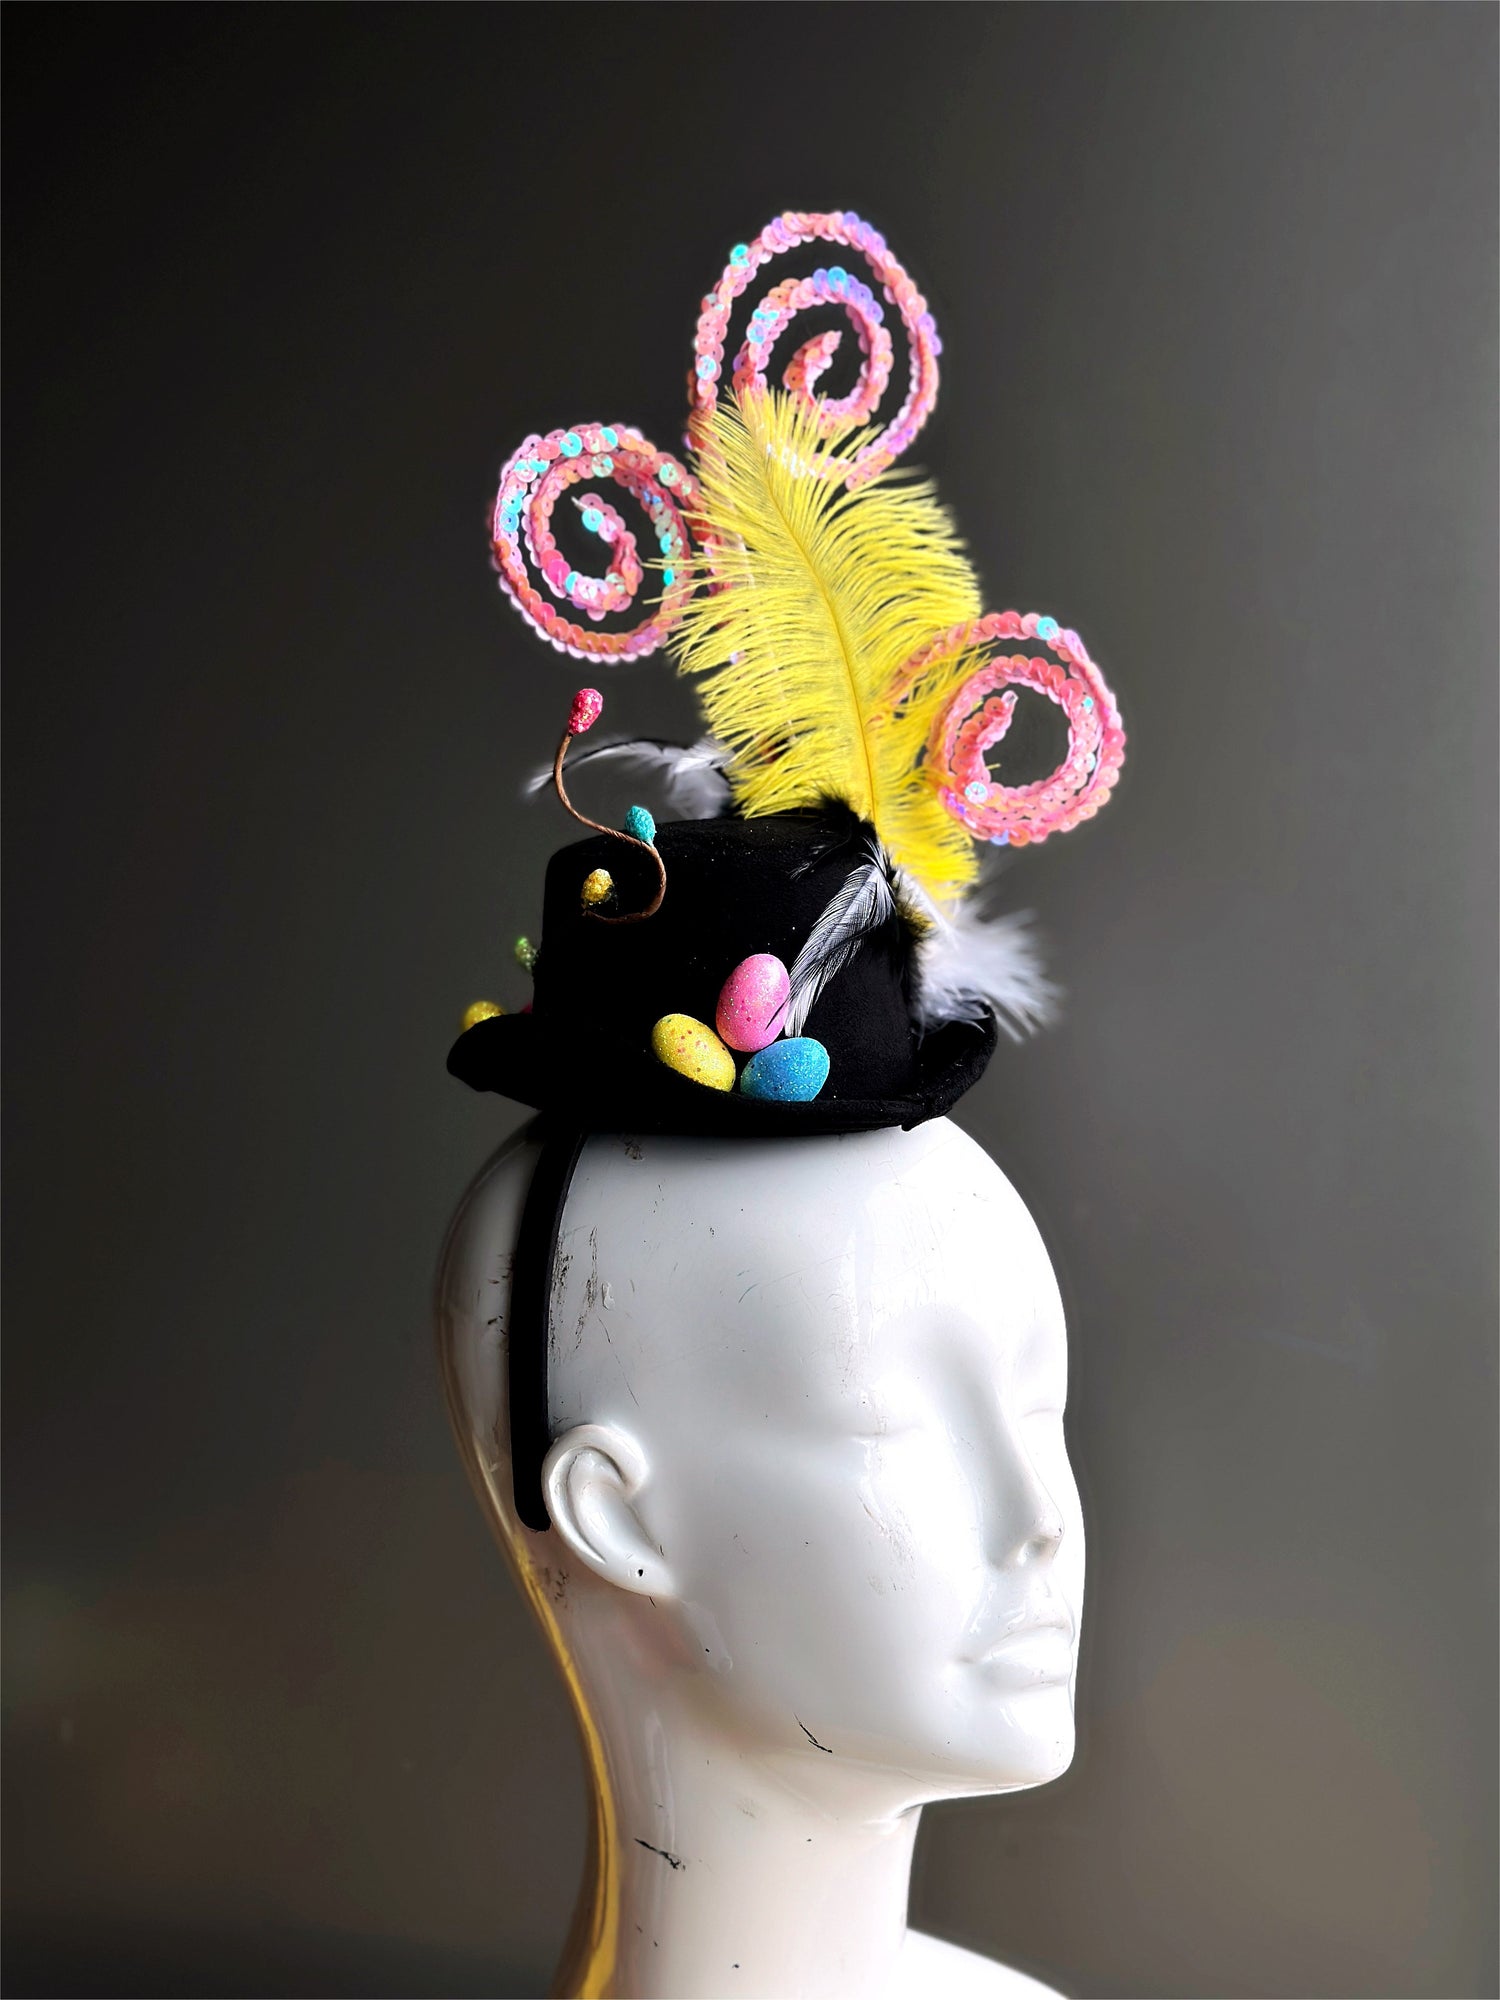 Black hat with colorful easter eggs, pink swirls, and feathers.